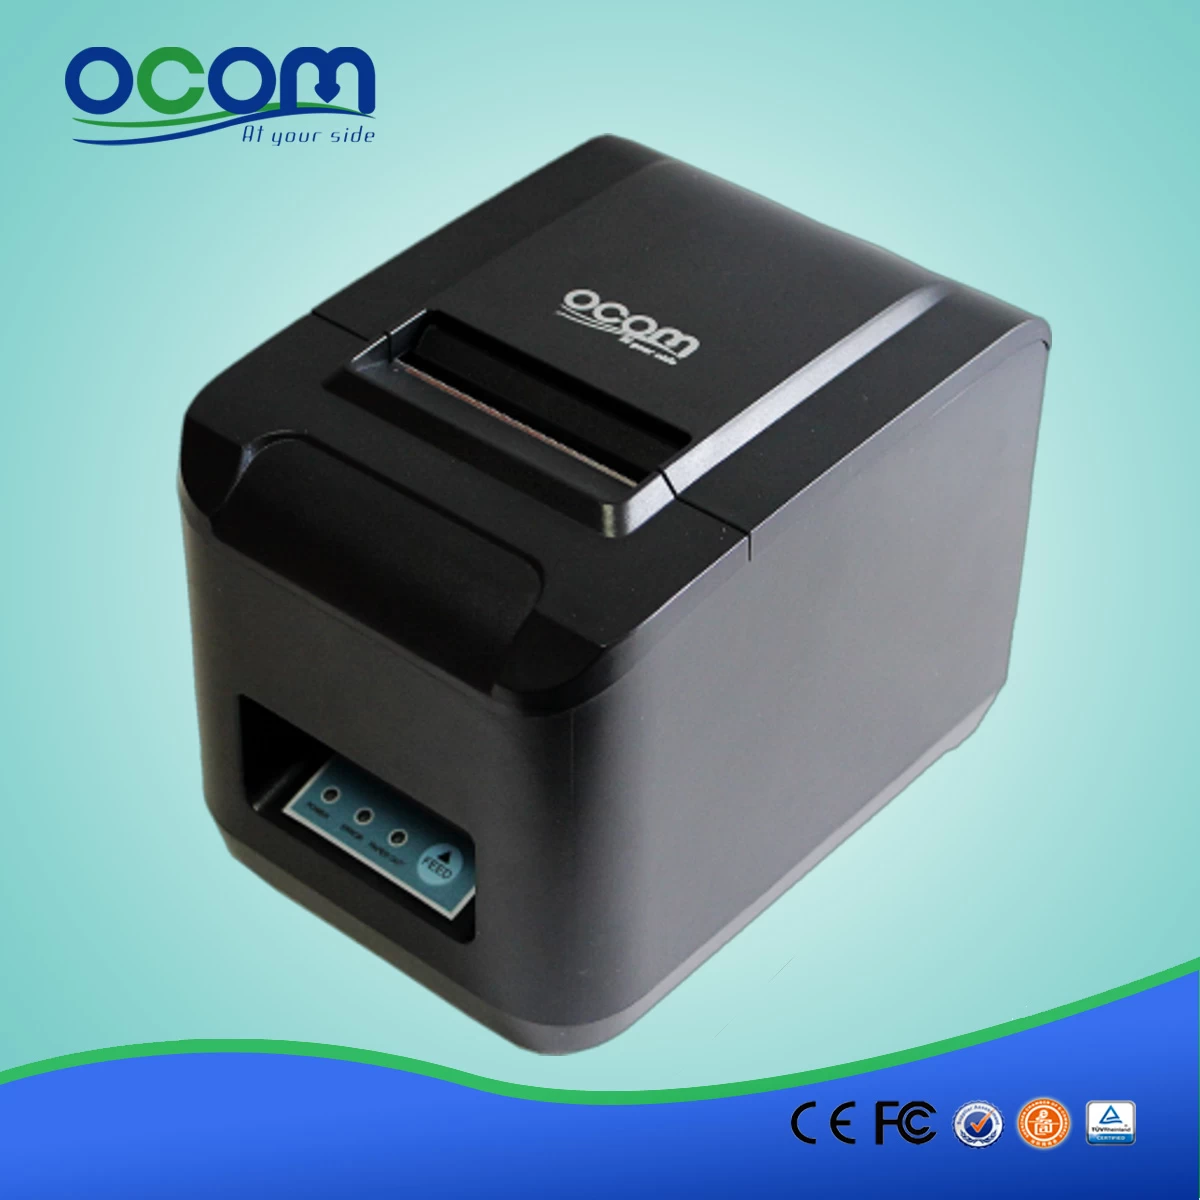 China 80mm Wifi Thermal Receipt Printer Factory